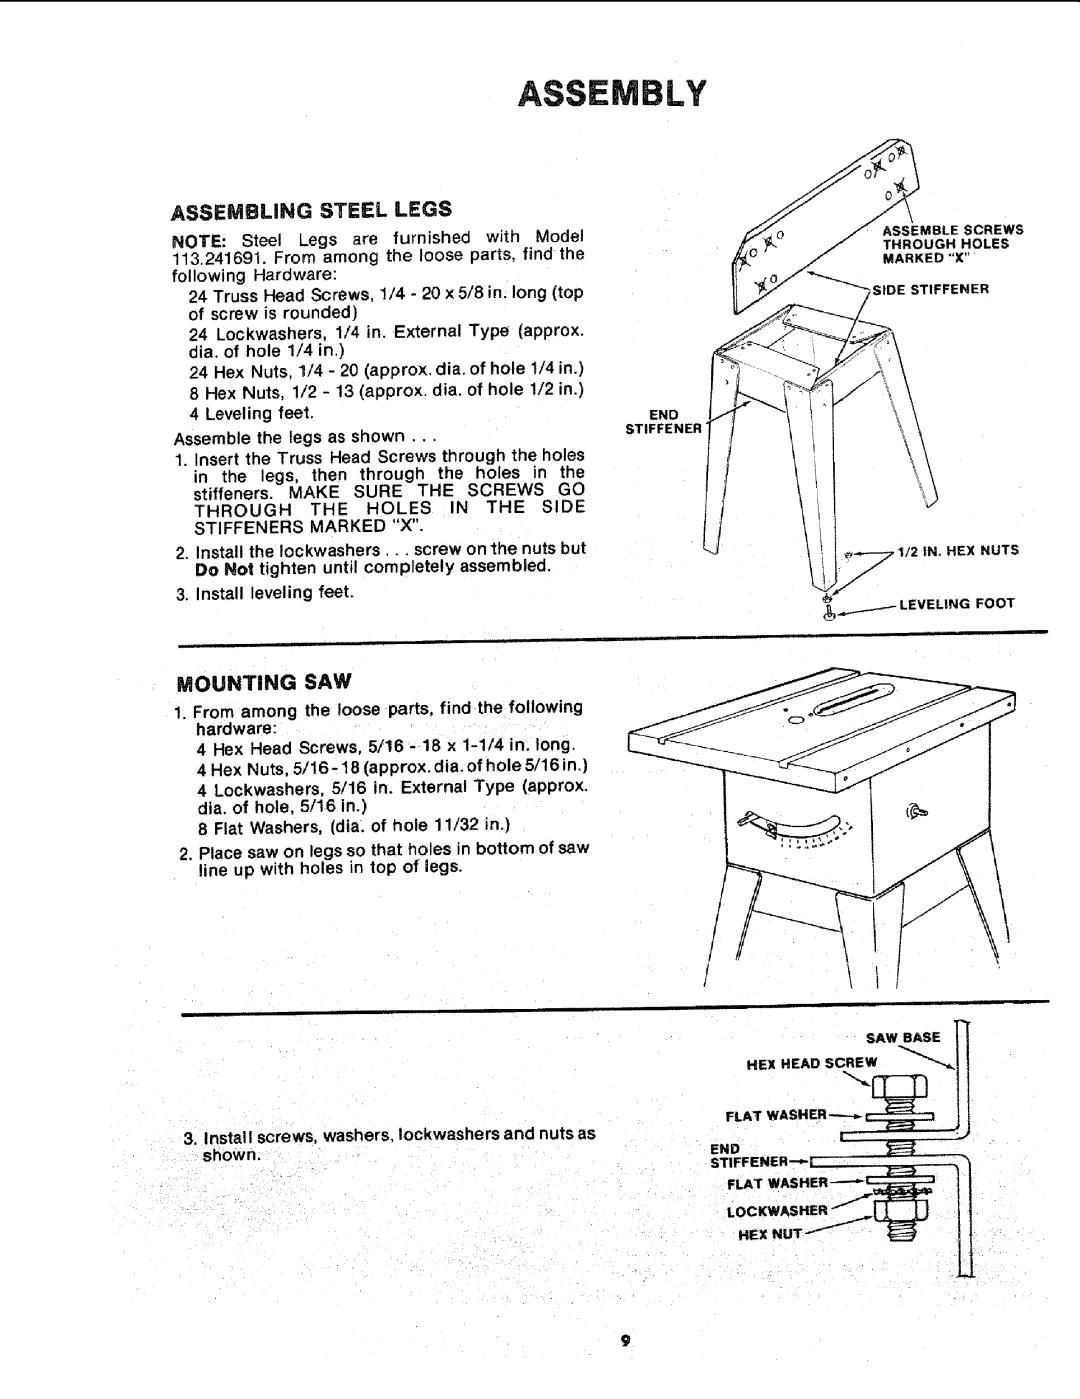 Sears 113.241591 owner manual Assembly, Assembling Steel Legs, Mounting Saw 